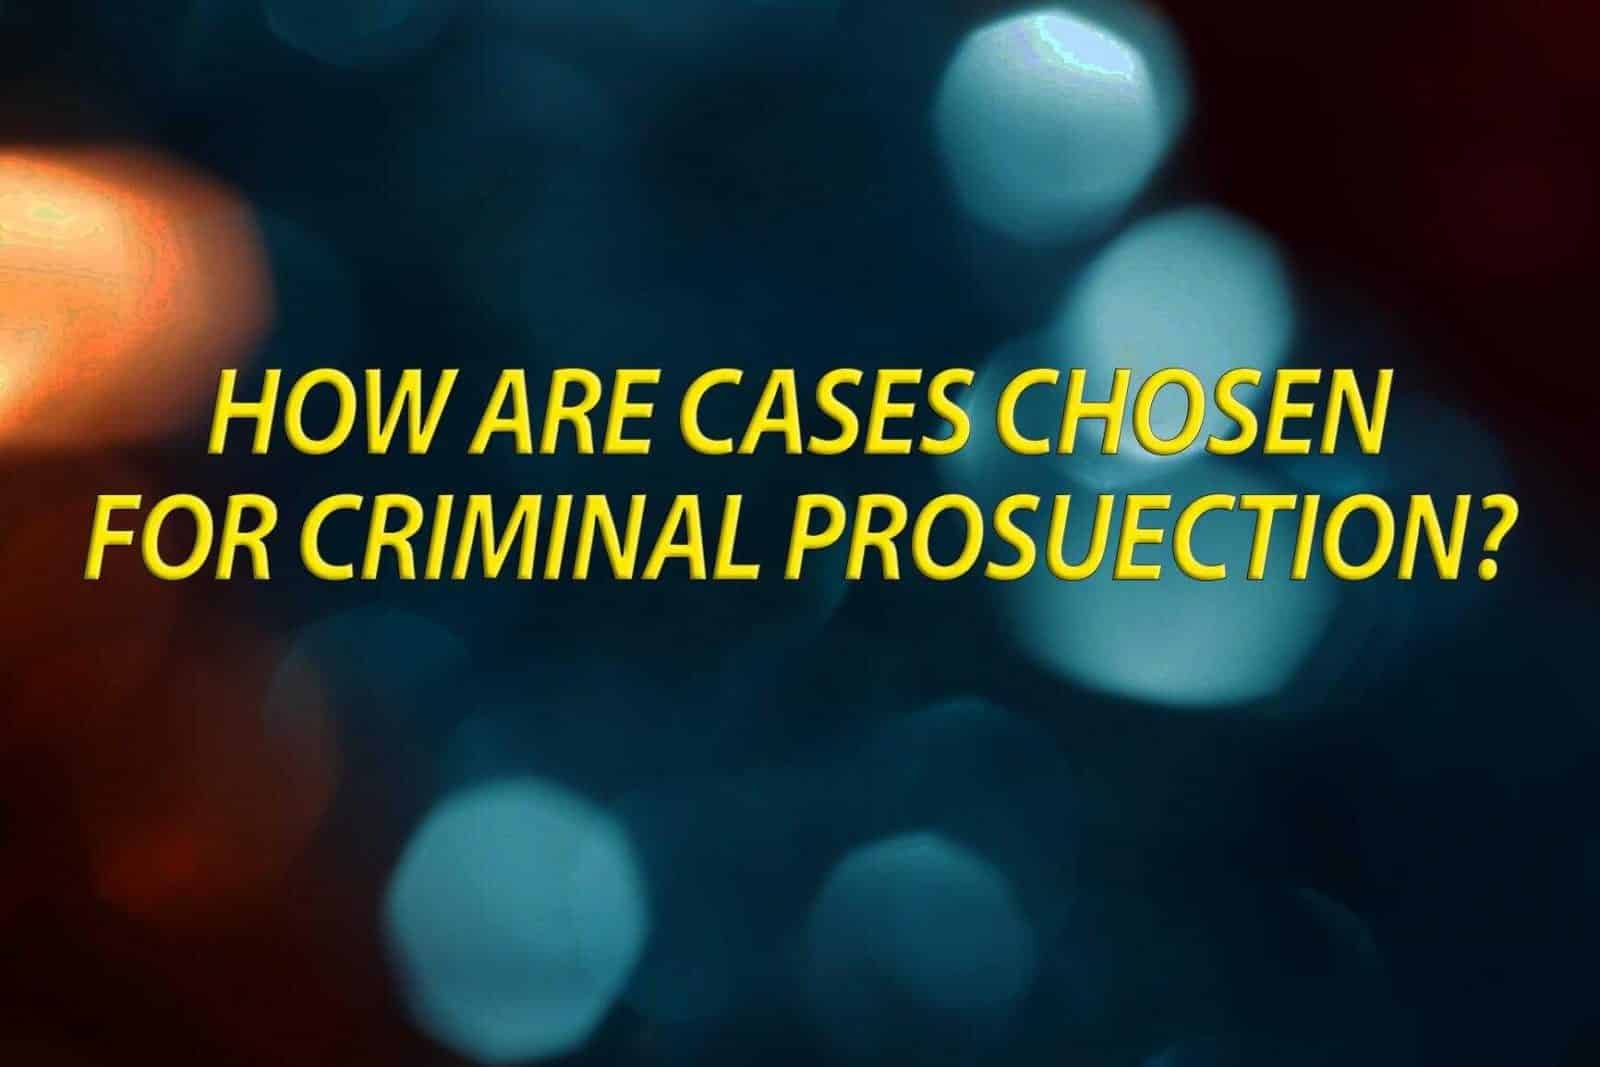 How are cases chosen for criminal prosecution